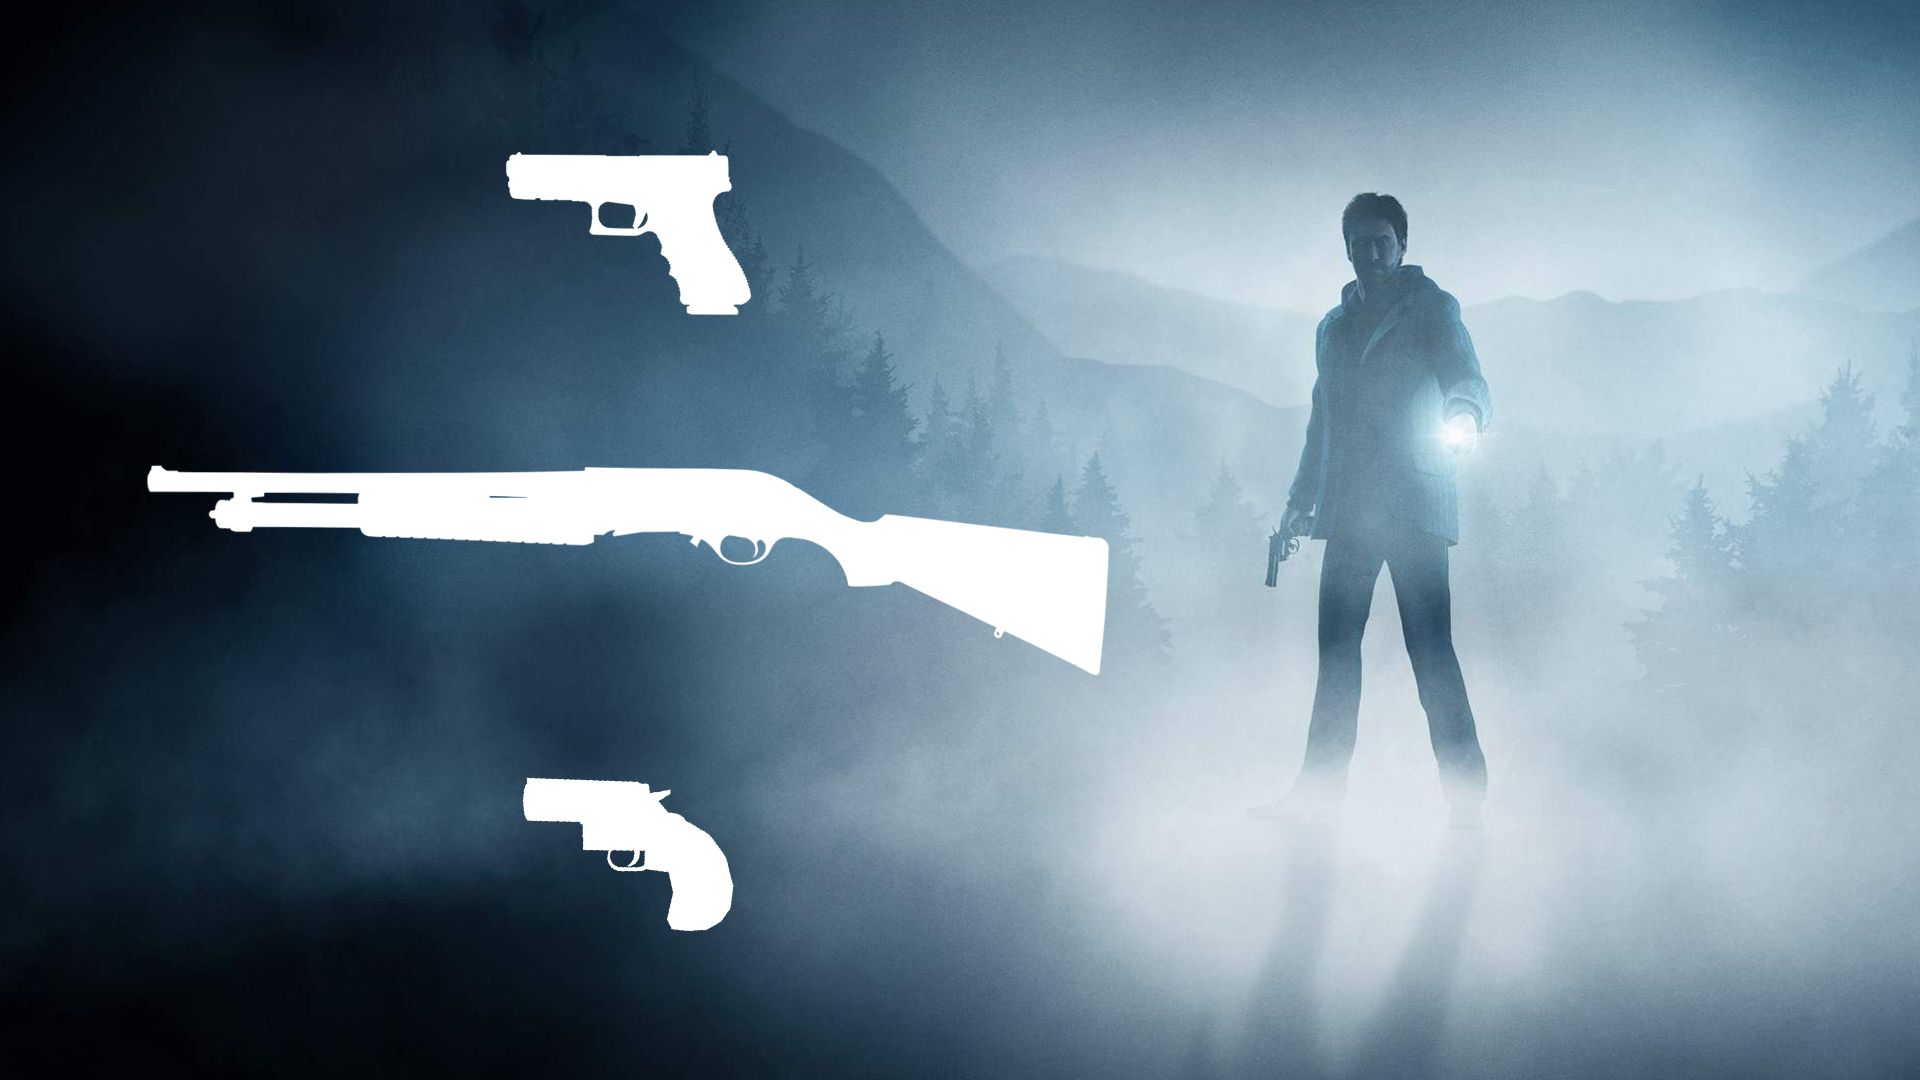 Alan Wake in a misty forest with silhouettes of weapons